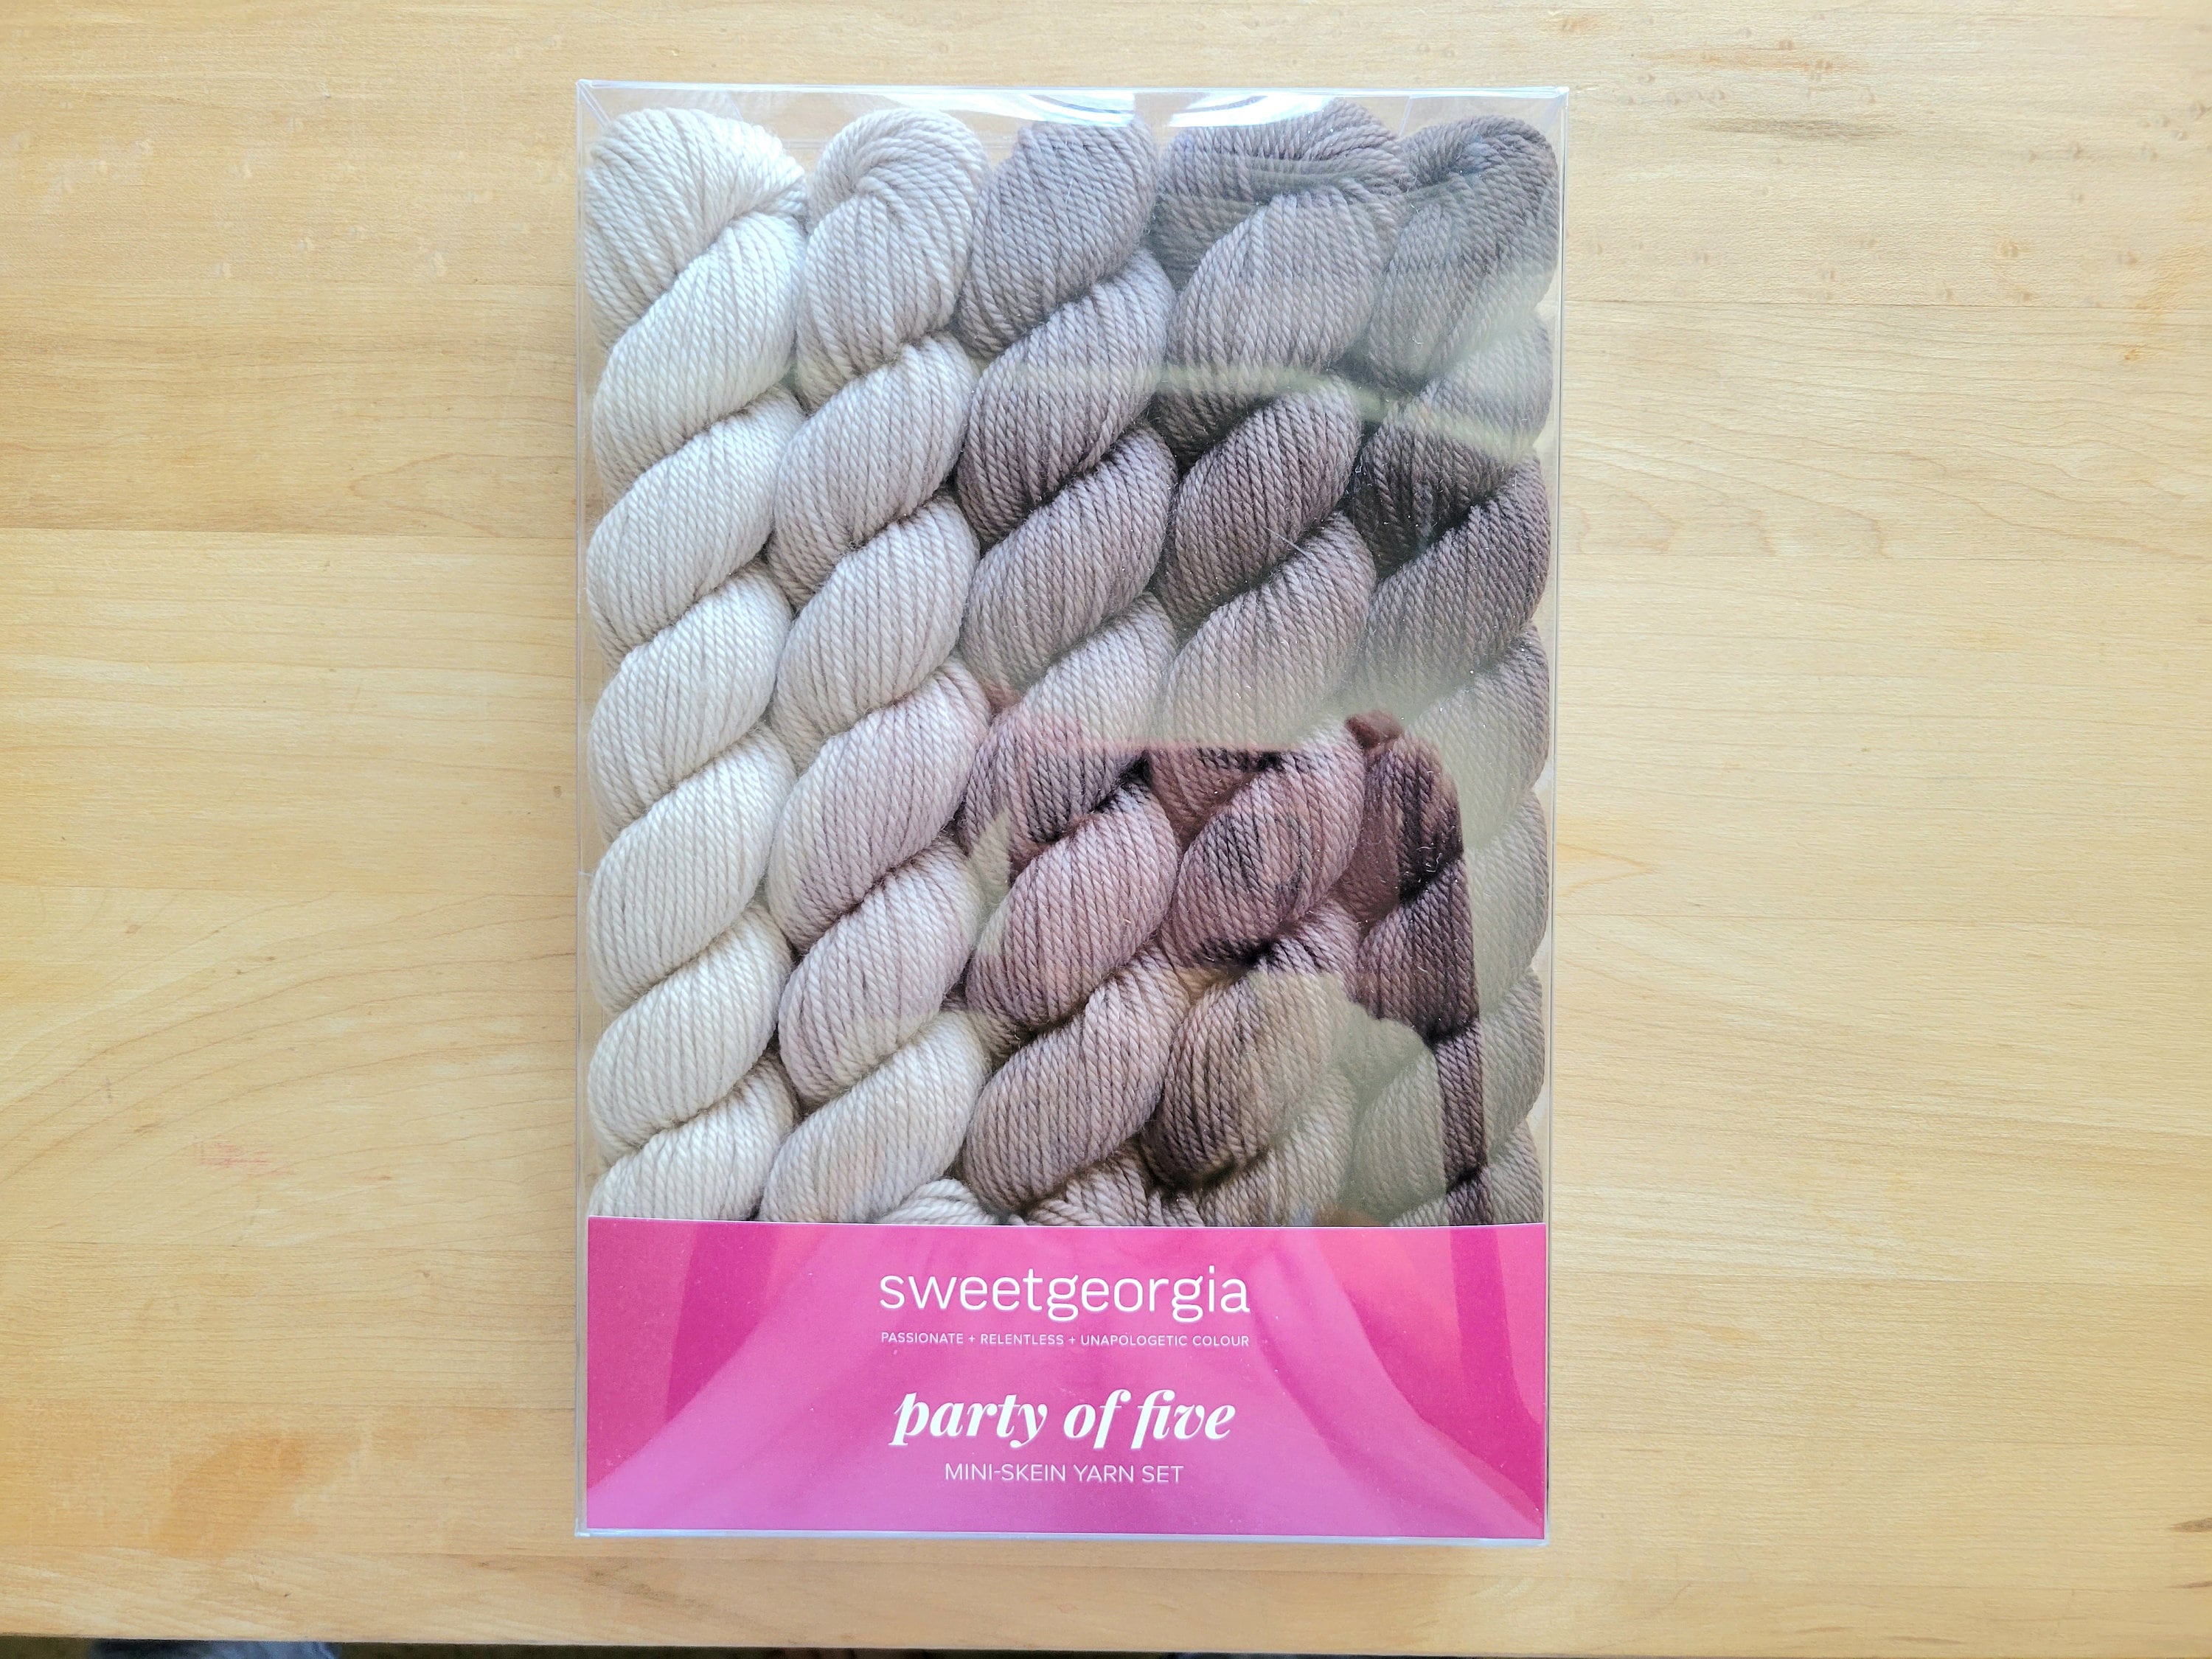 Party of Five Mini-Skein Set  Hand-Dyed Yarn by SweetGeorgia